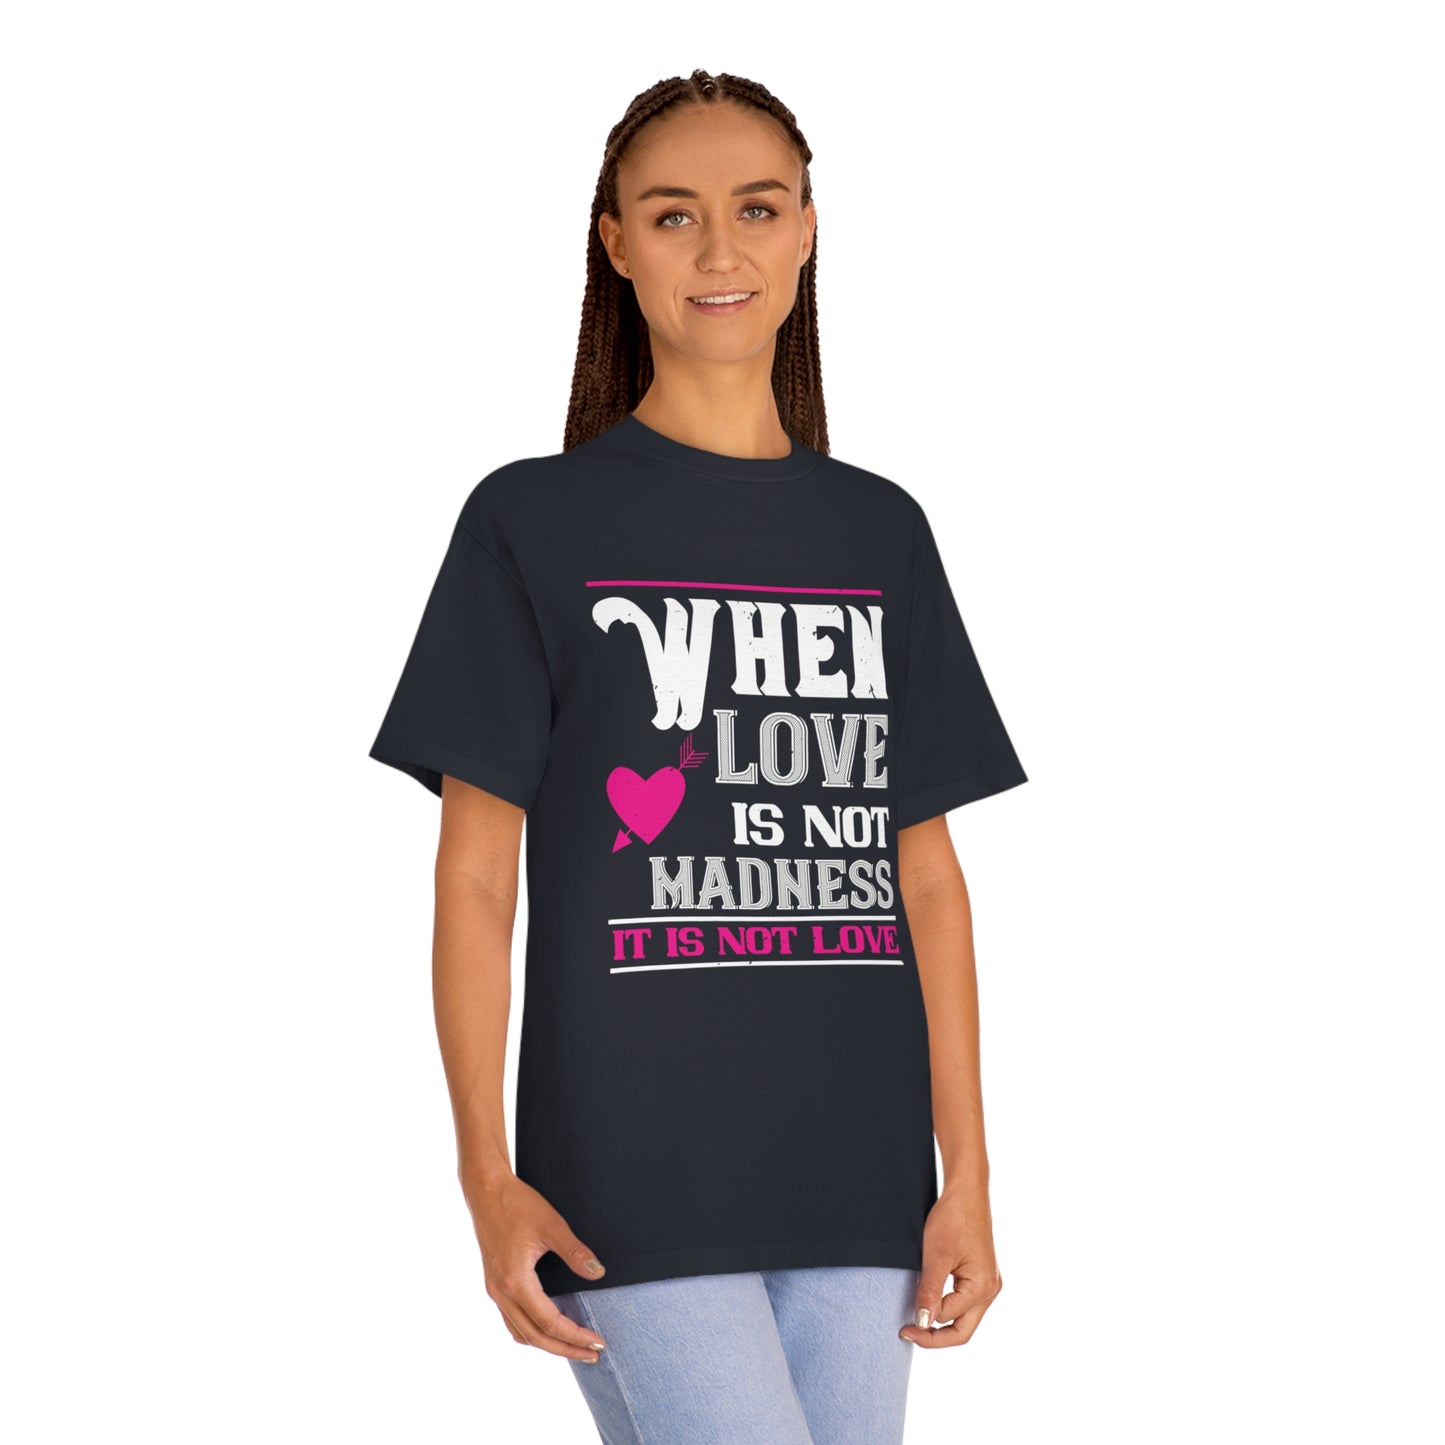 When love is not madness its not love Unisex Classic Tee